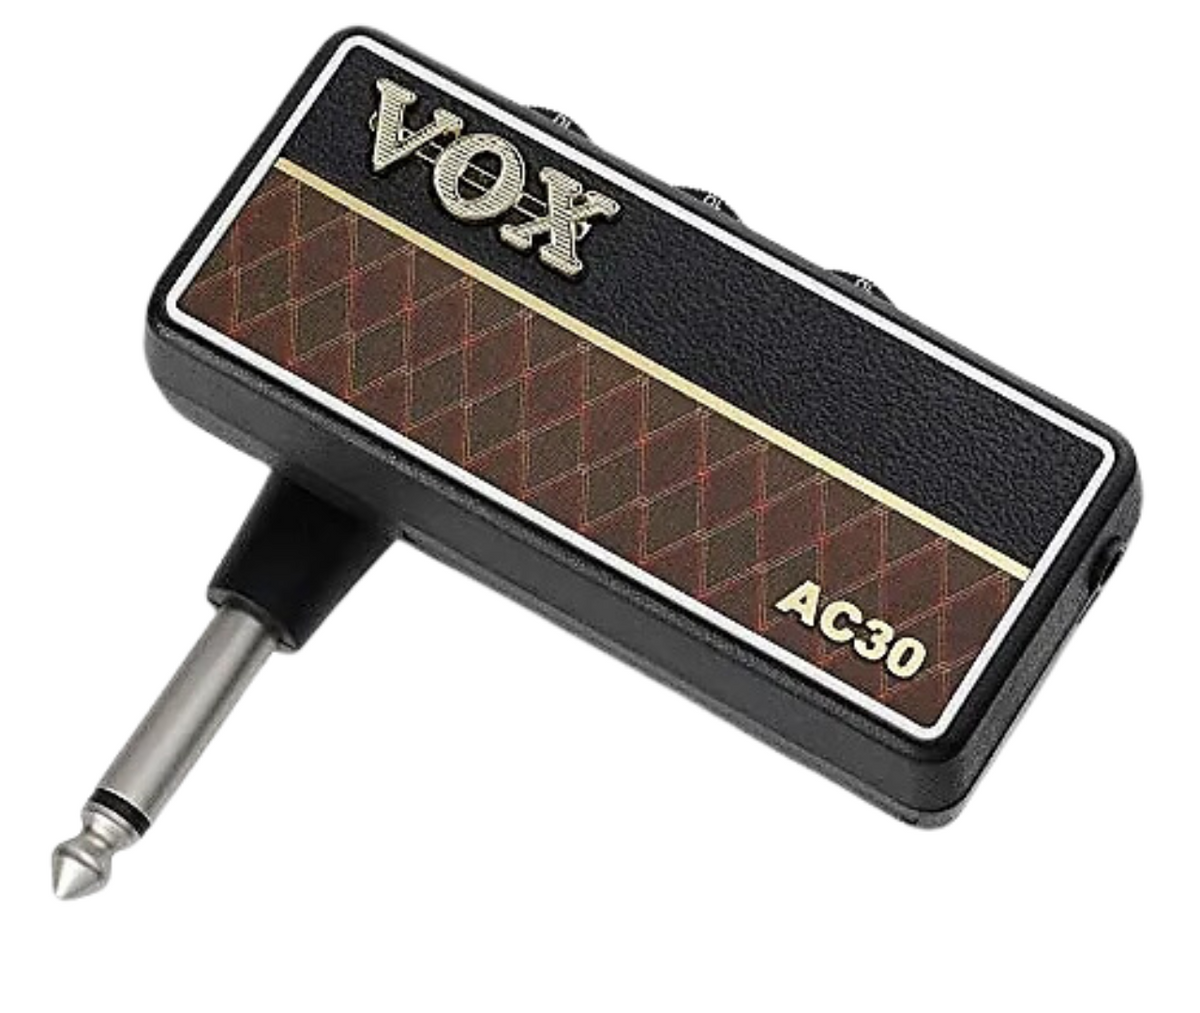 VOX AP2AC – Amplug 2 AC30 Guitar Amplifier Headphones Top Boost Sound for AC30 with Auto Power-off Function